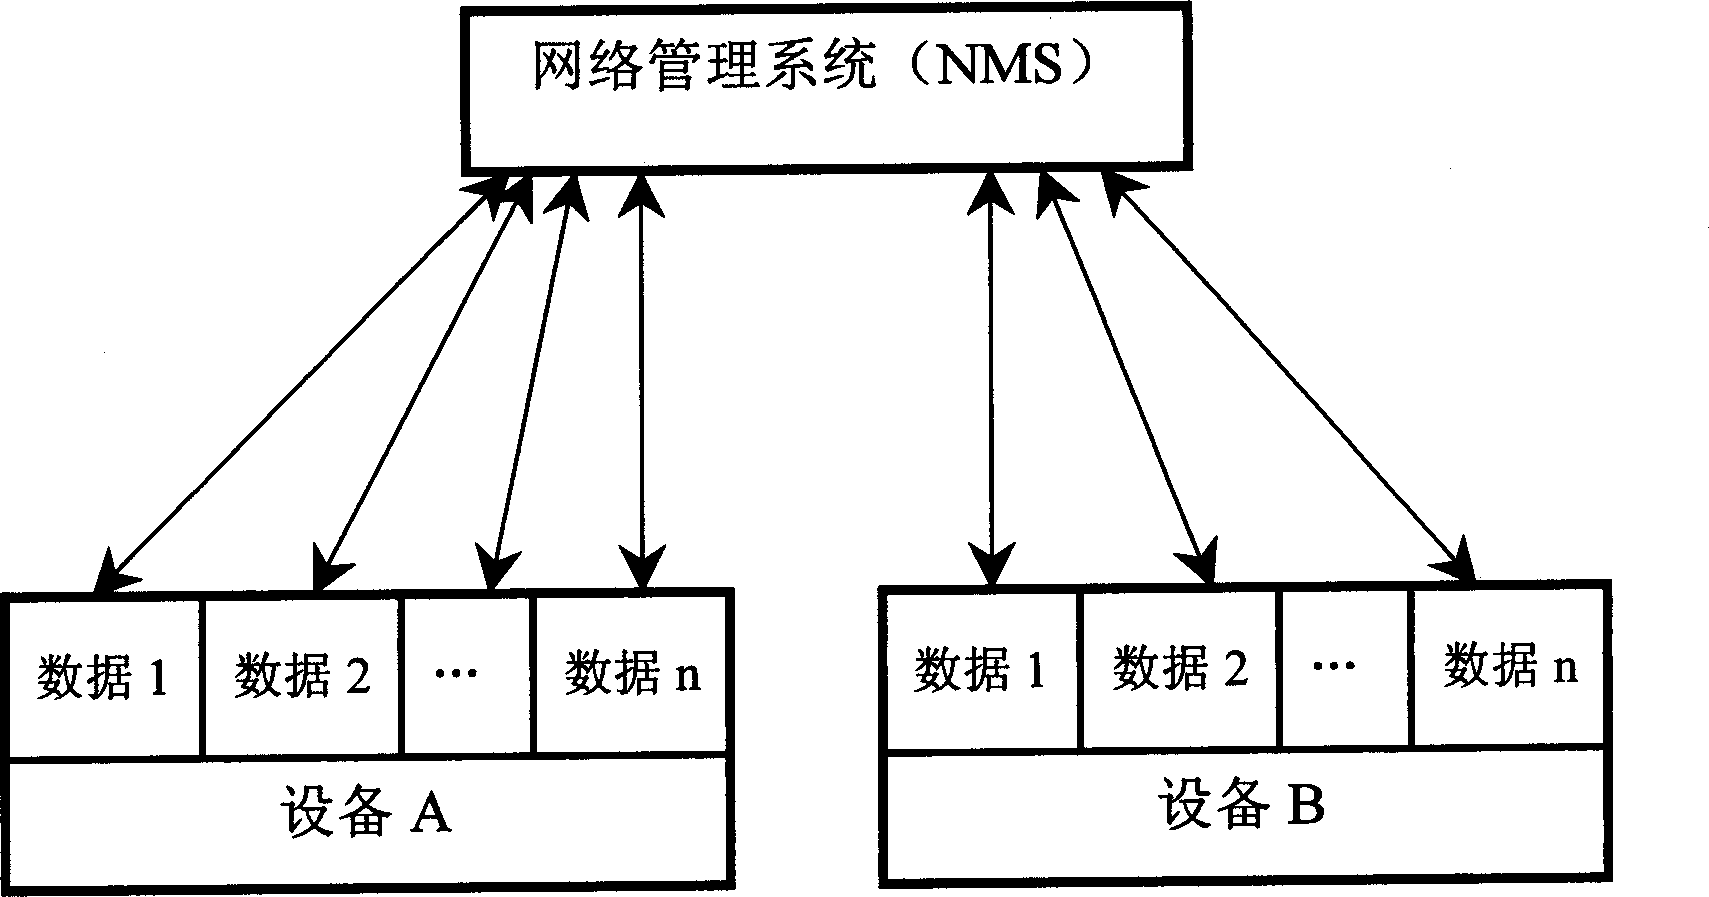 Method for polling communication device by network management system